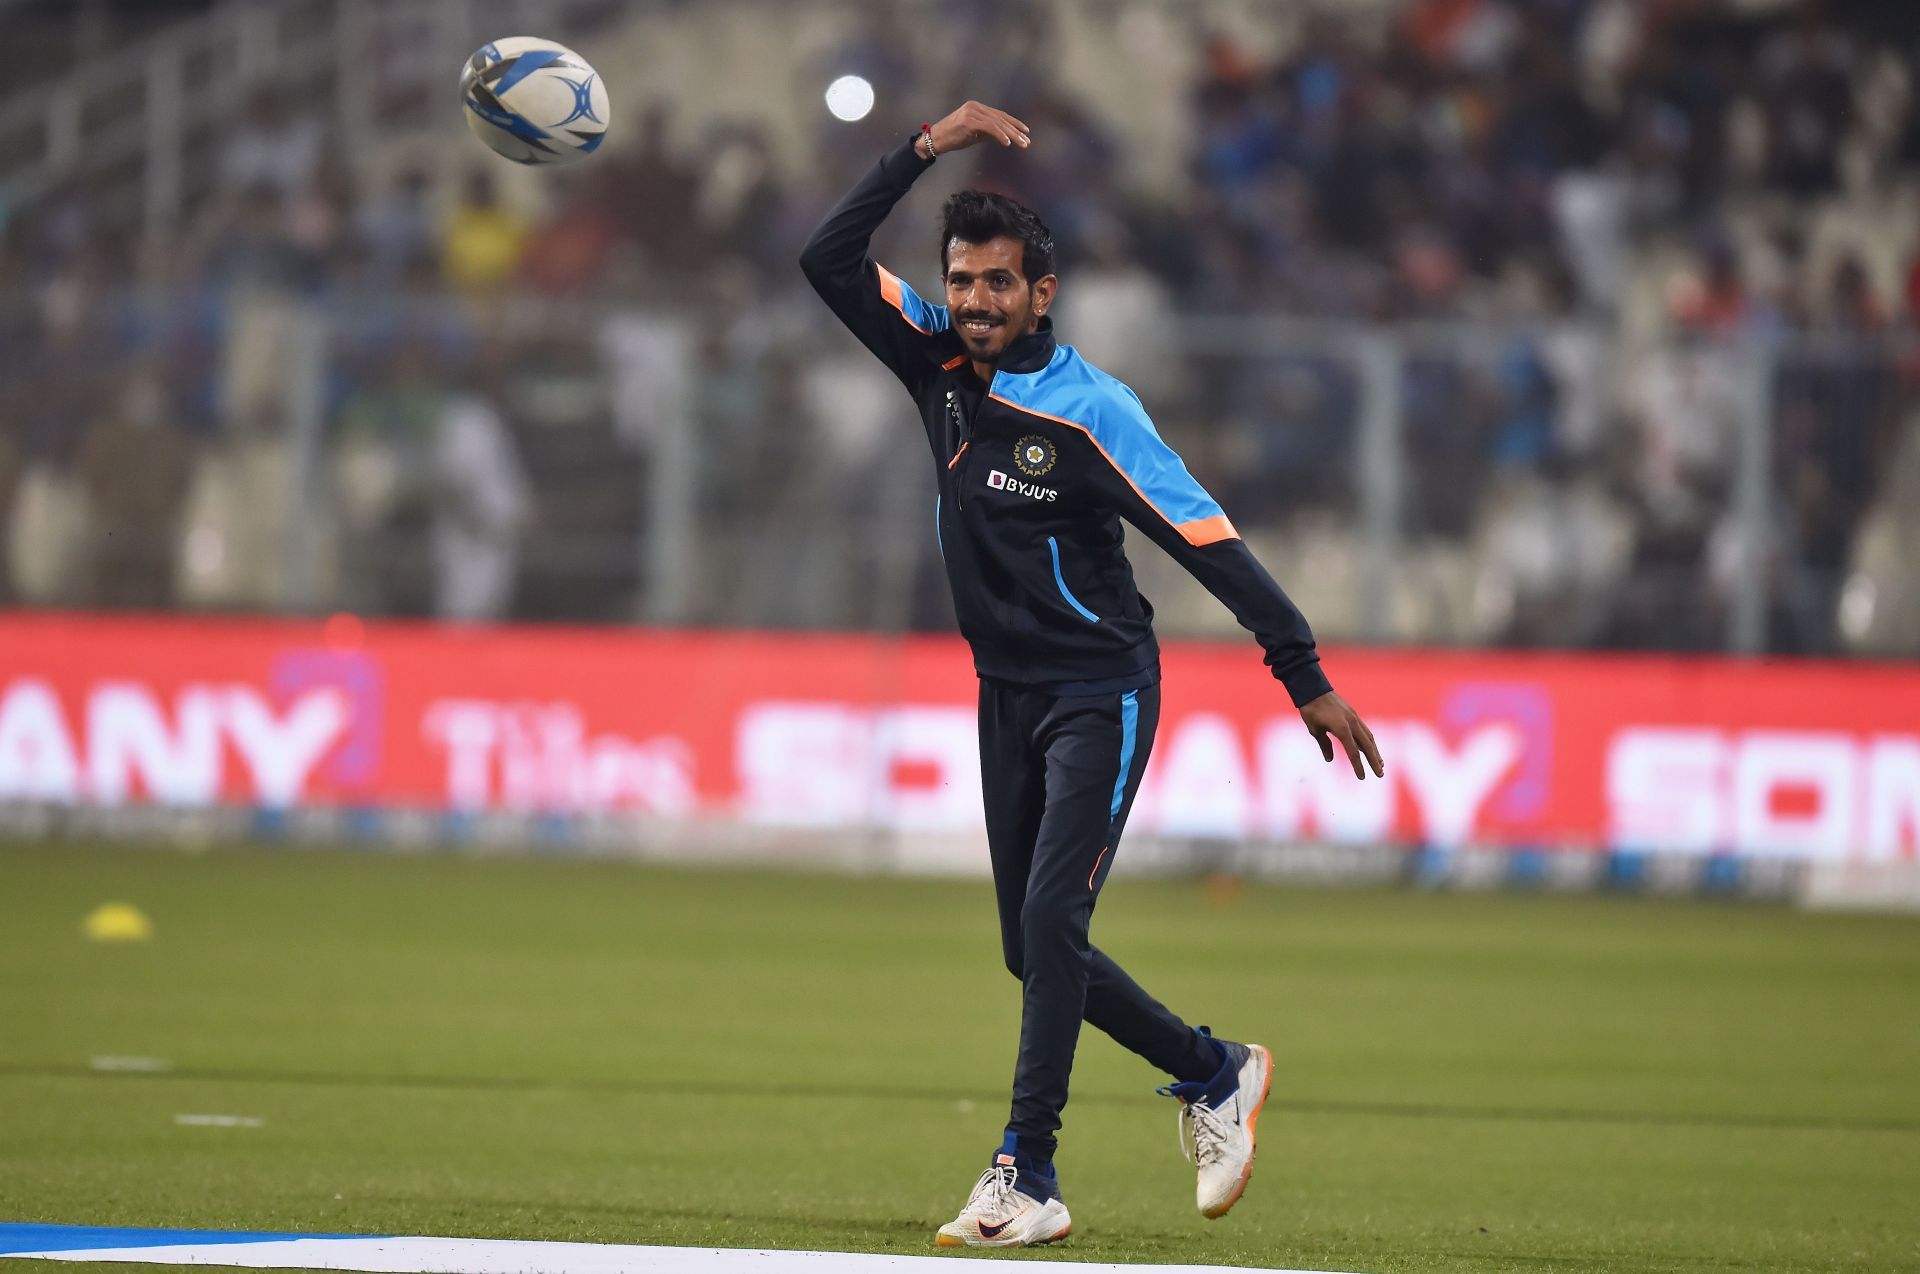 A Masterclass in spin bowling from Yuzi Chahal